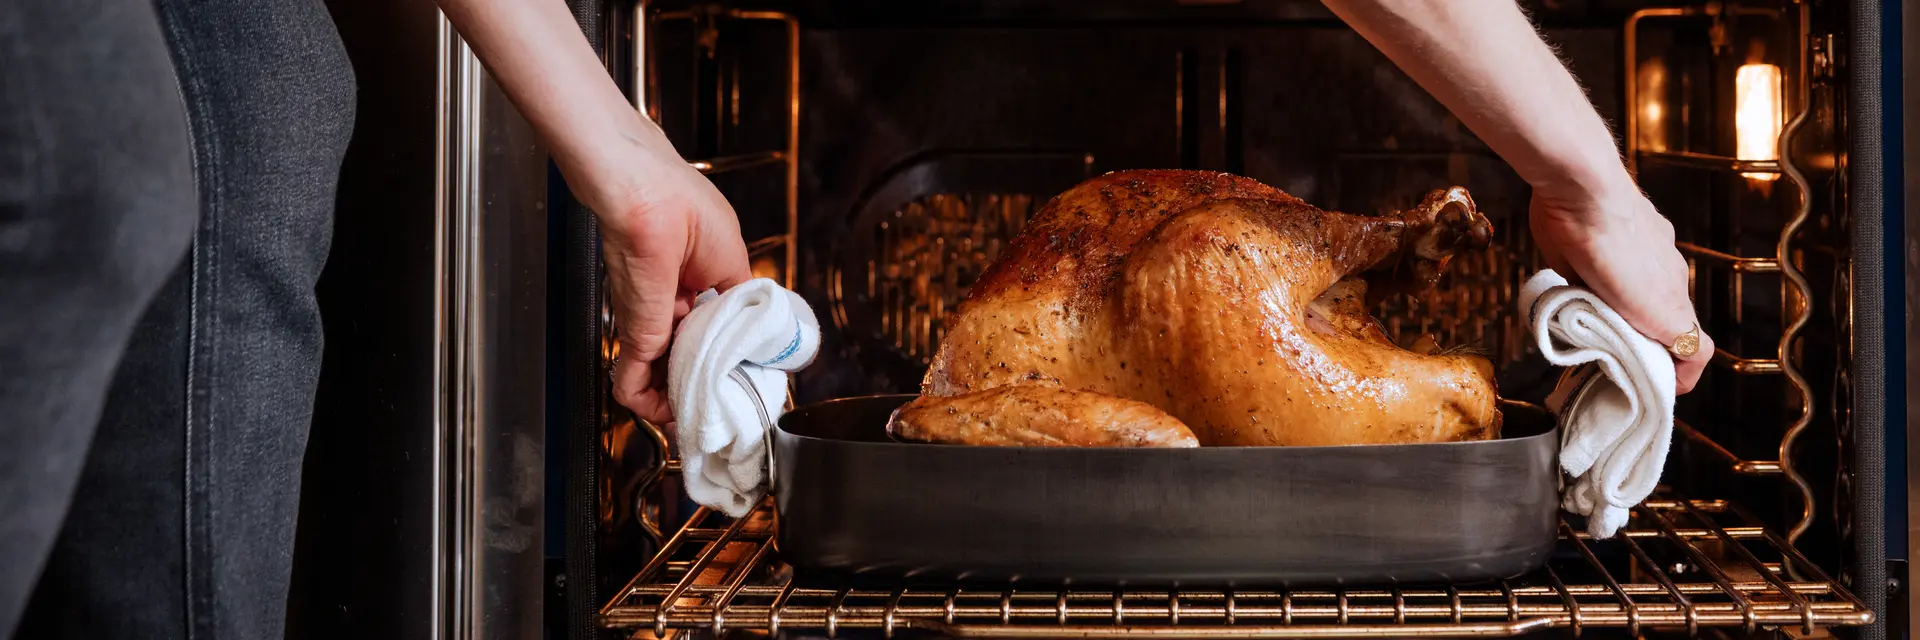 A person is taking a golden-brown roasted turkey out of the oven using oven mitts.